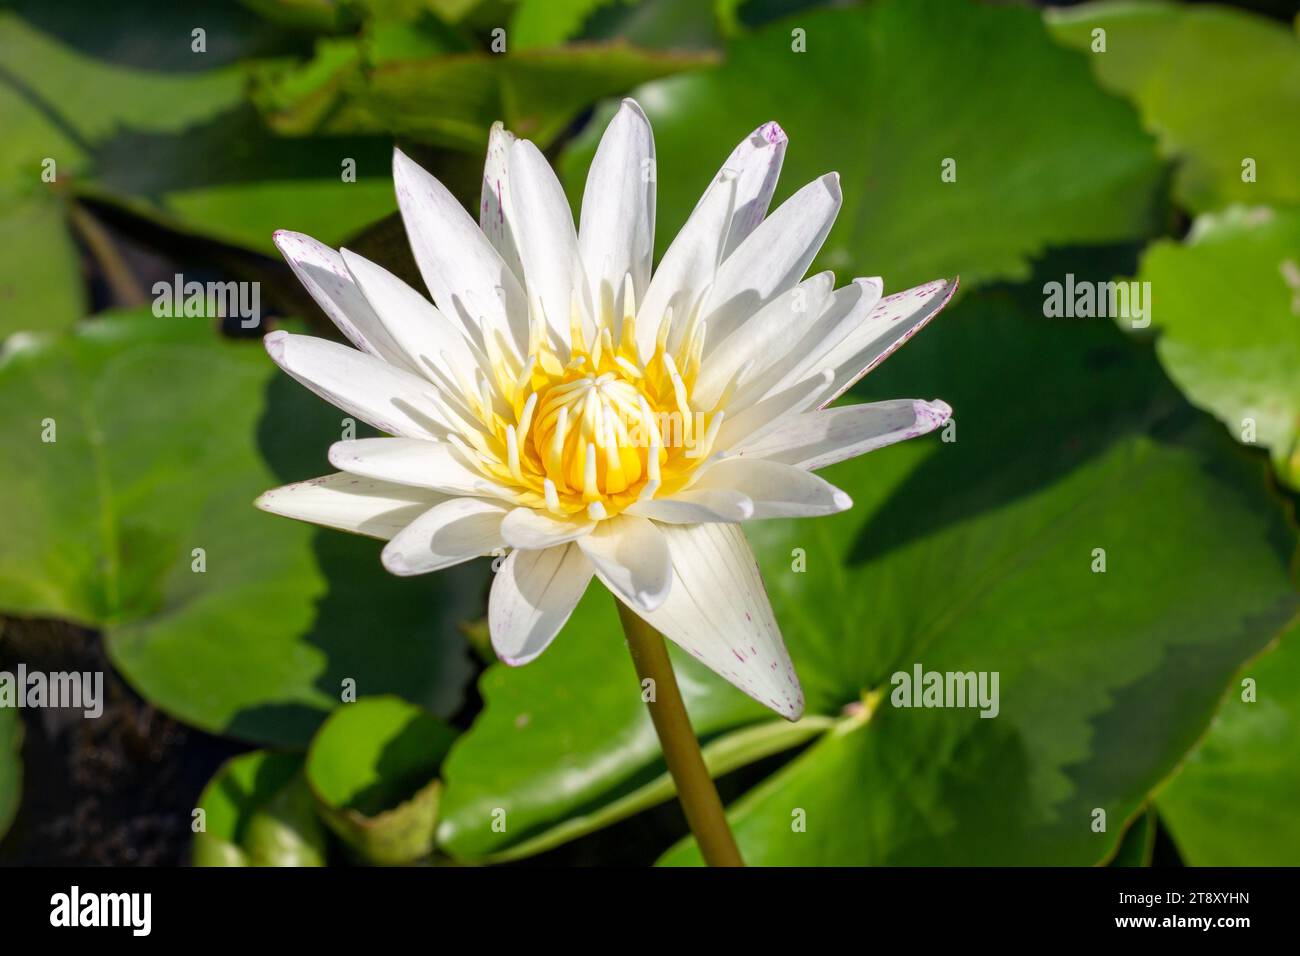 White lotus flower with green leaves on a pond, close-up. Stock Photo